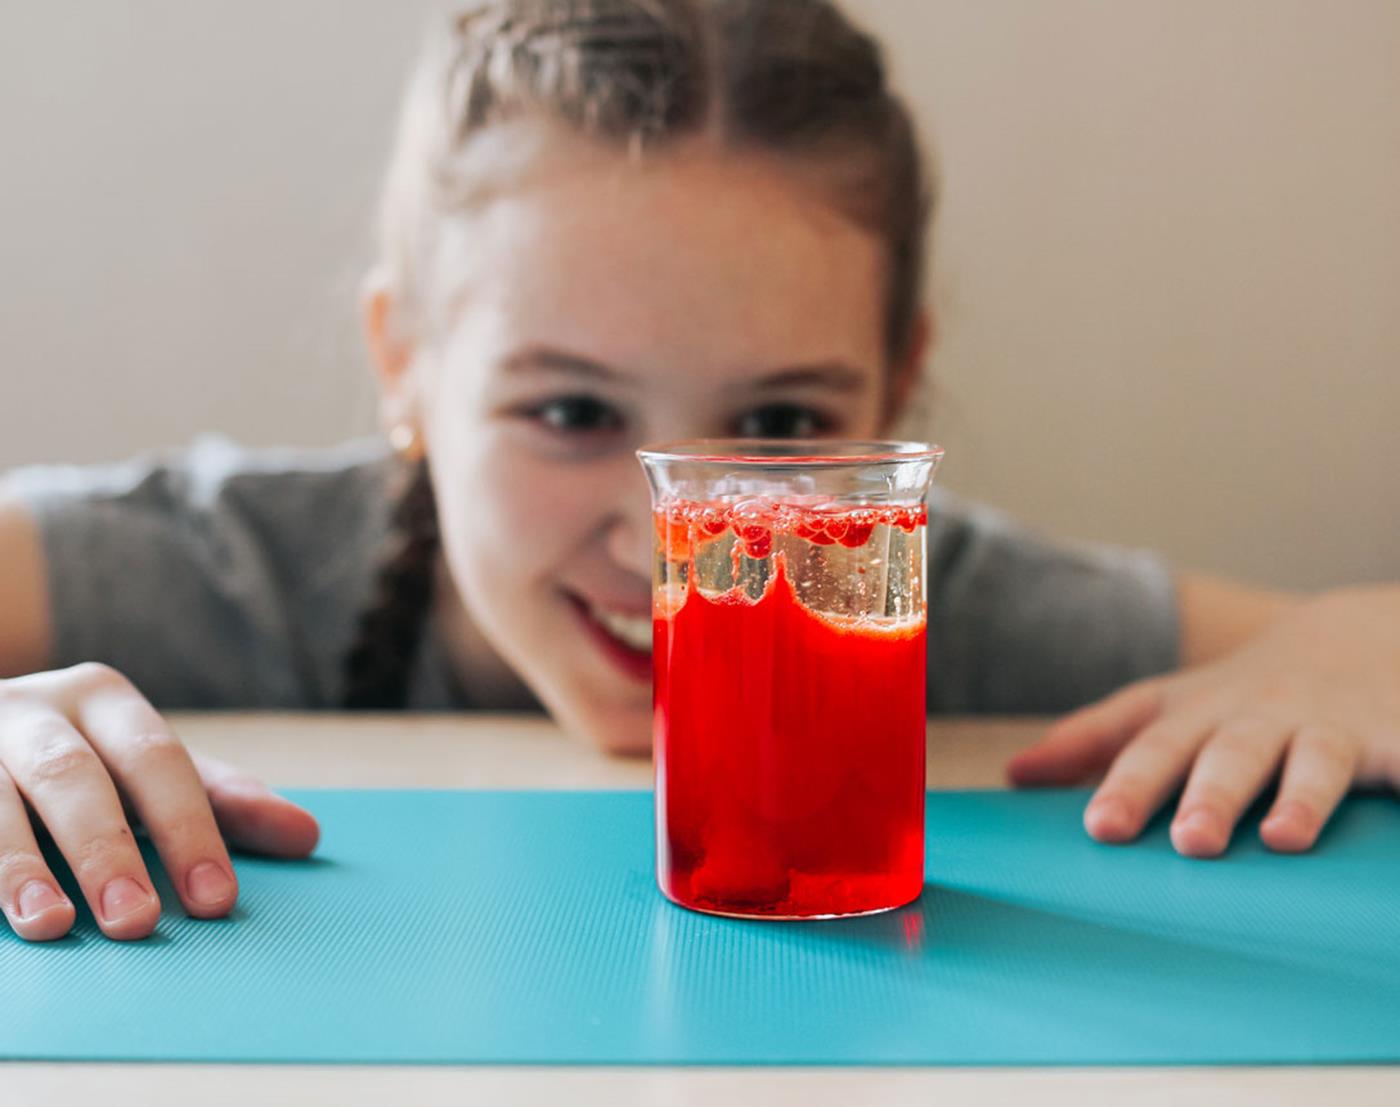 Girl looking at homemade lava lamp activity on desk